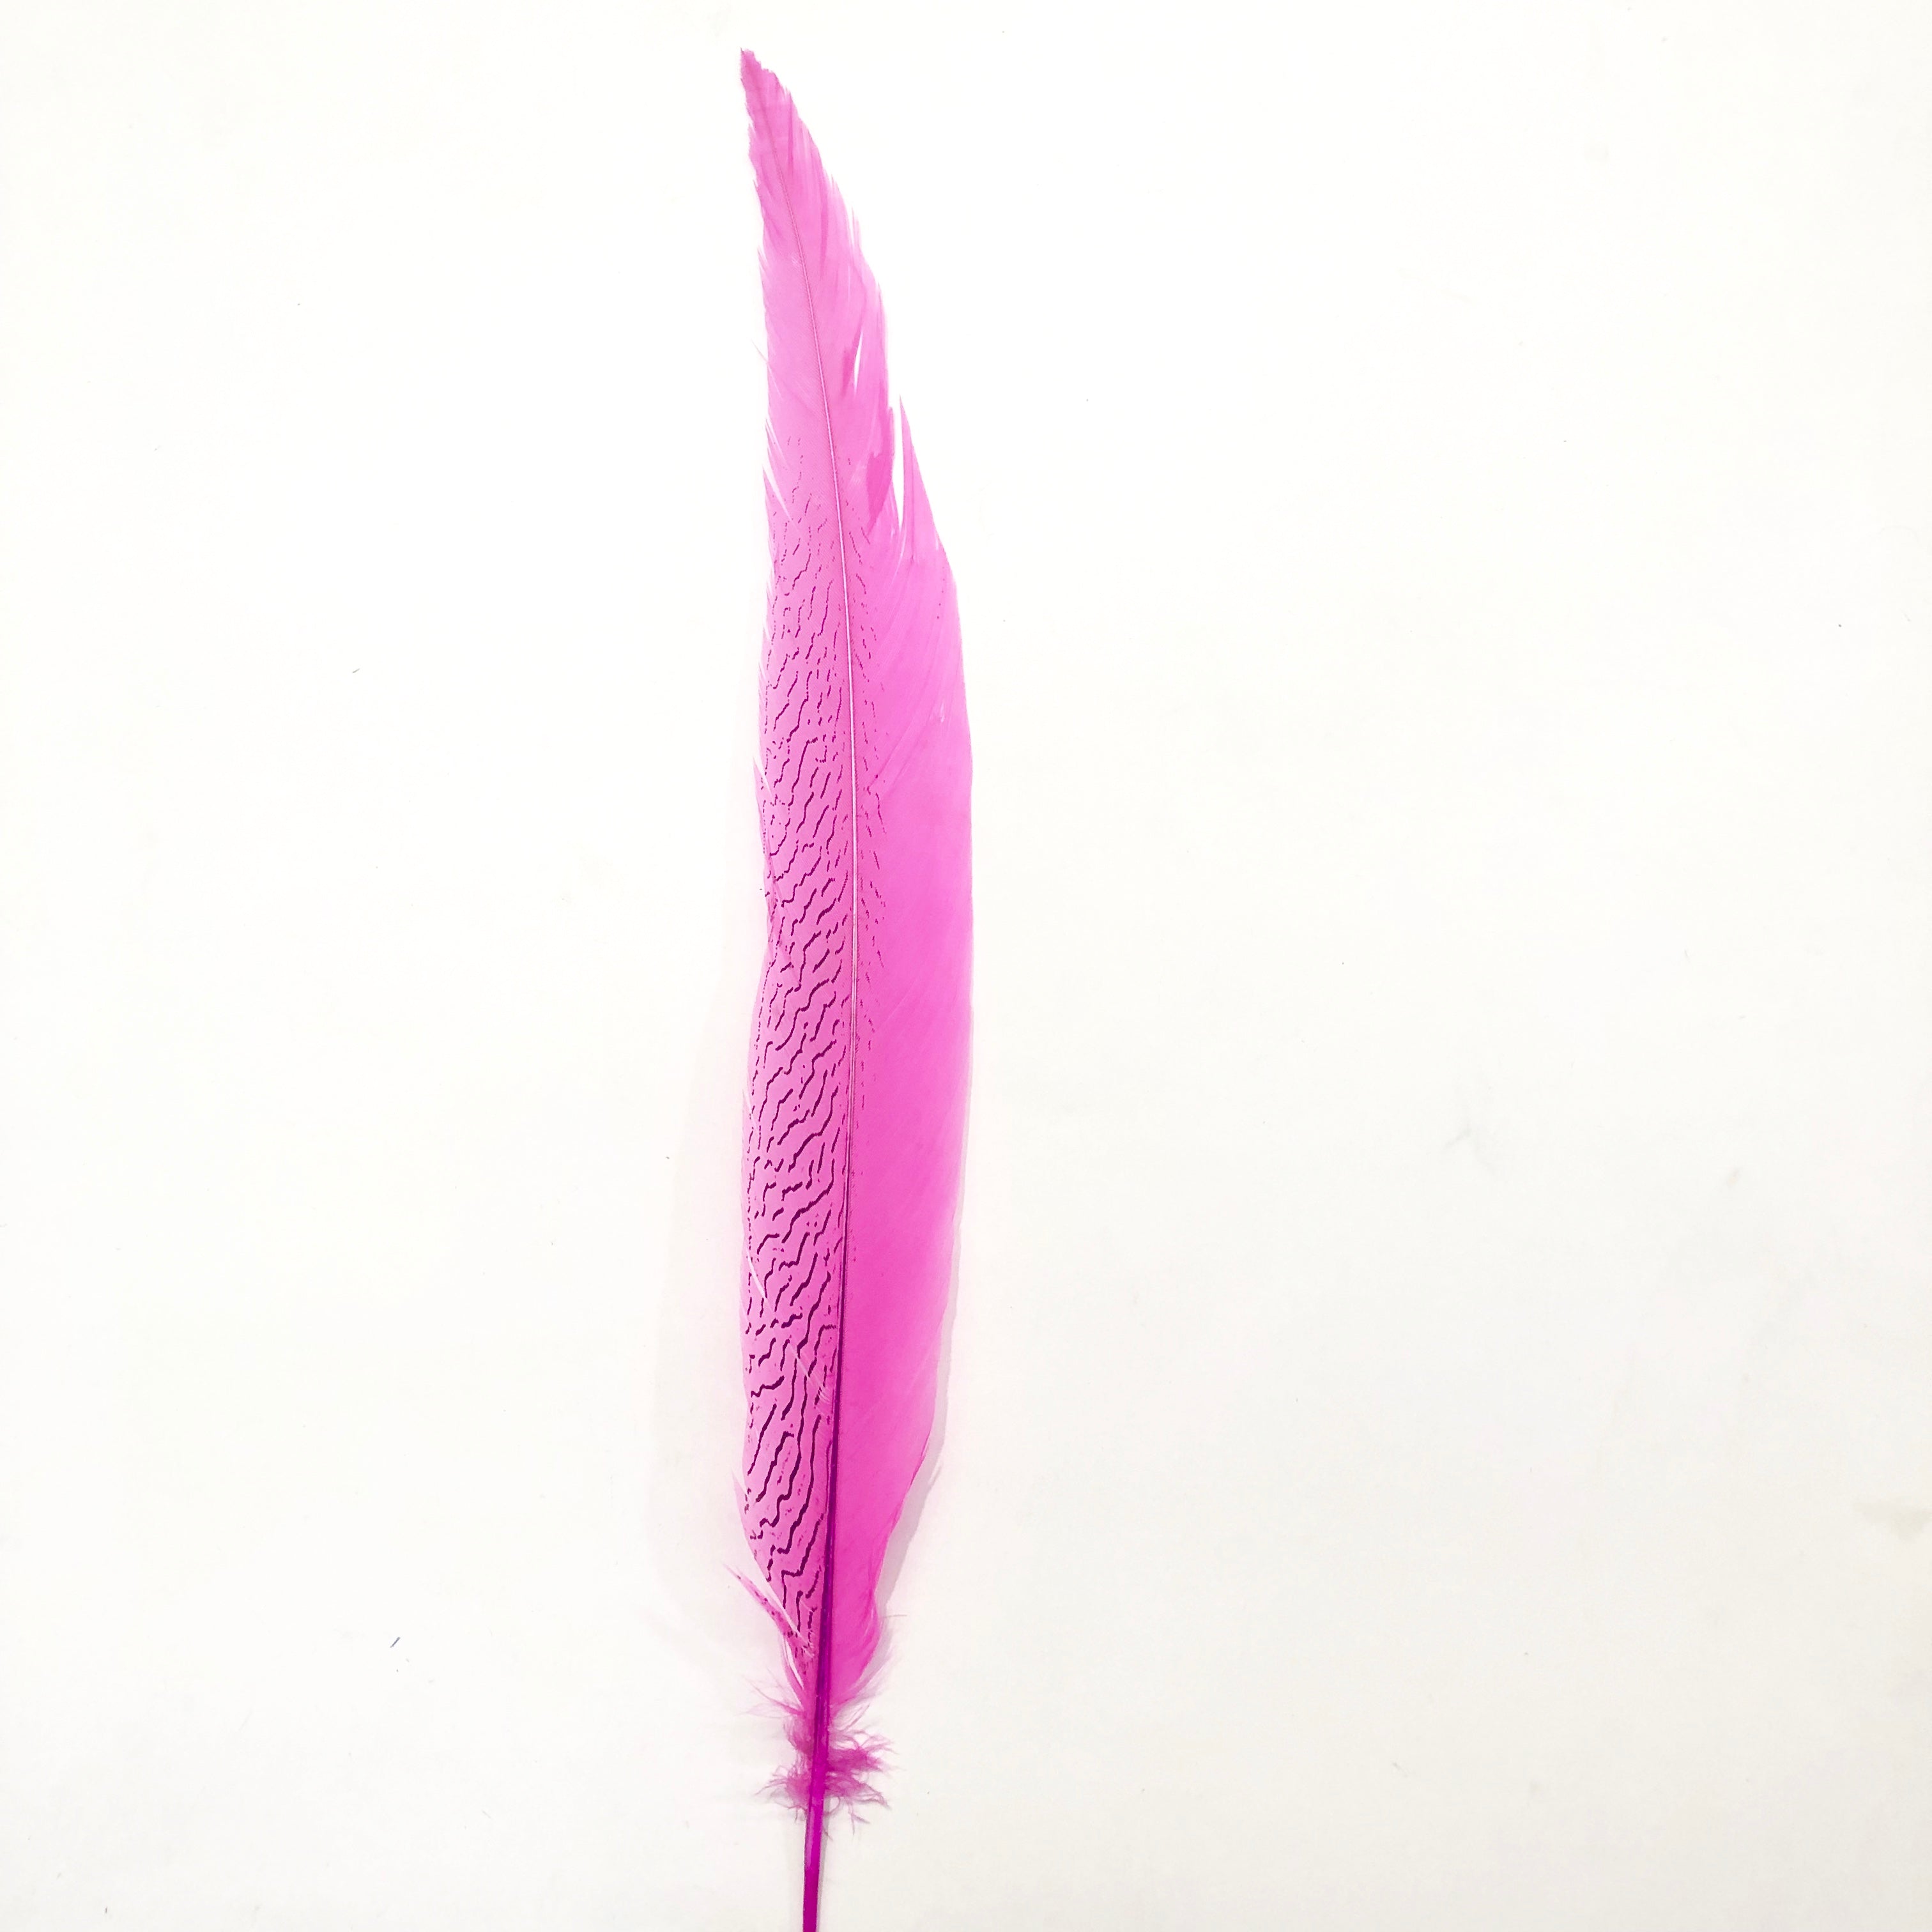 20" to 30" Silver Pheasant Tail Feather - Hot Pink